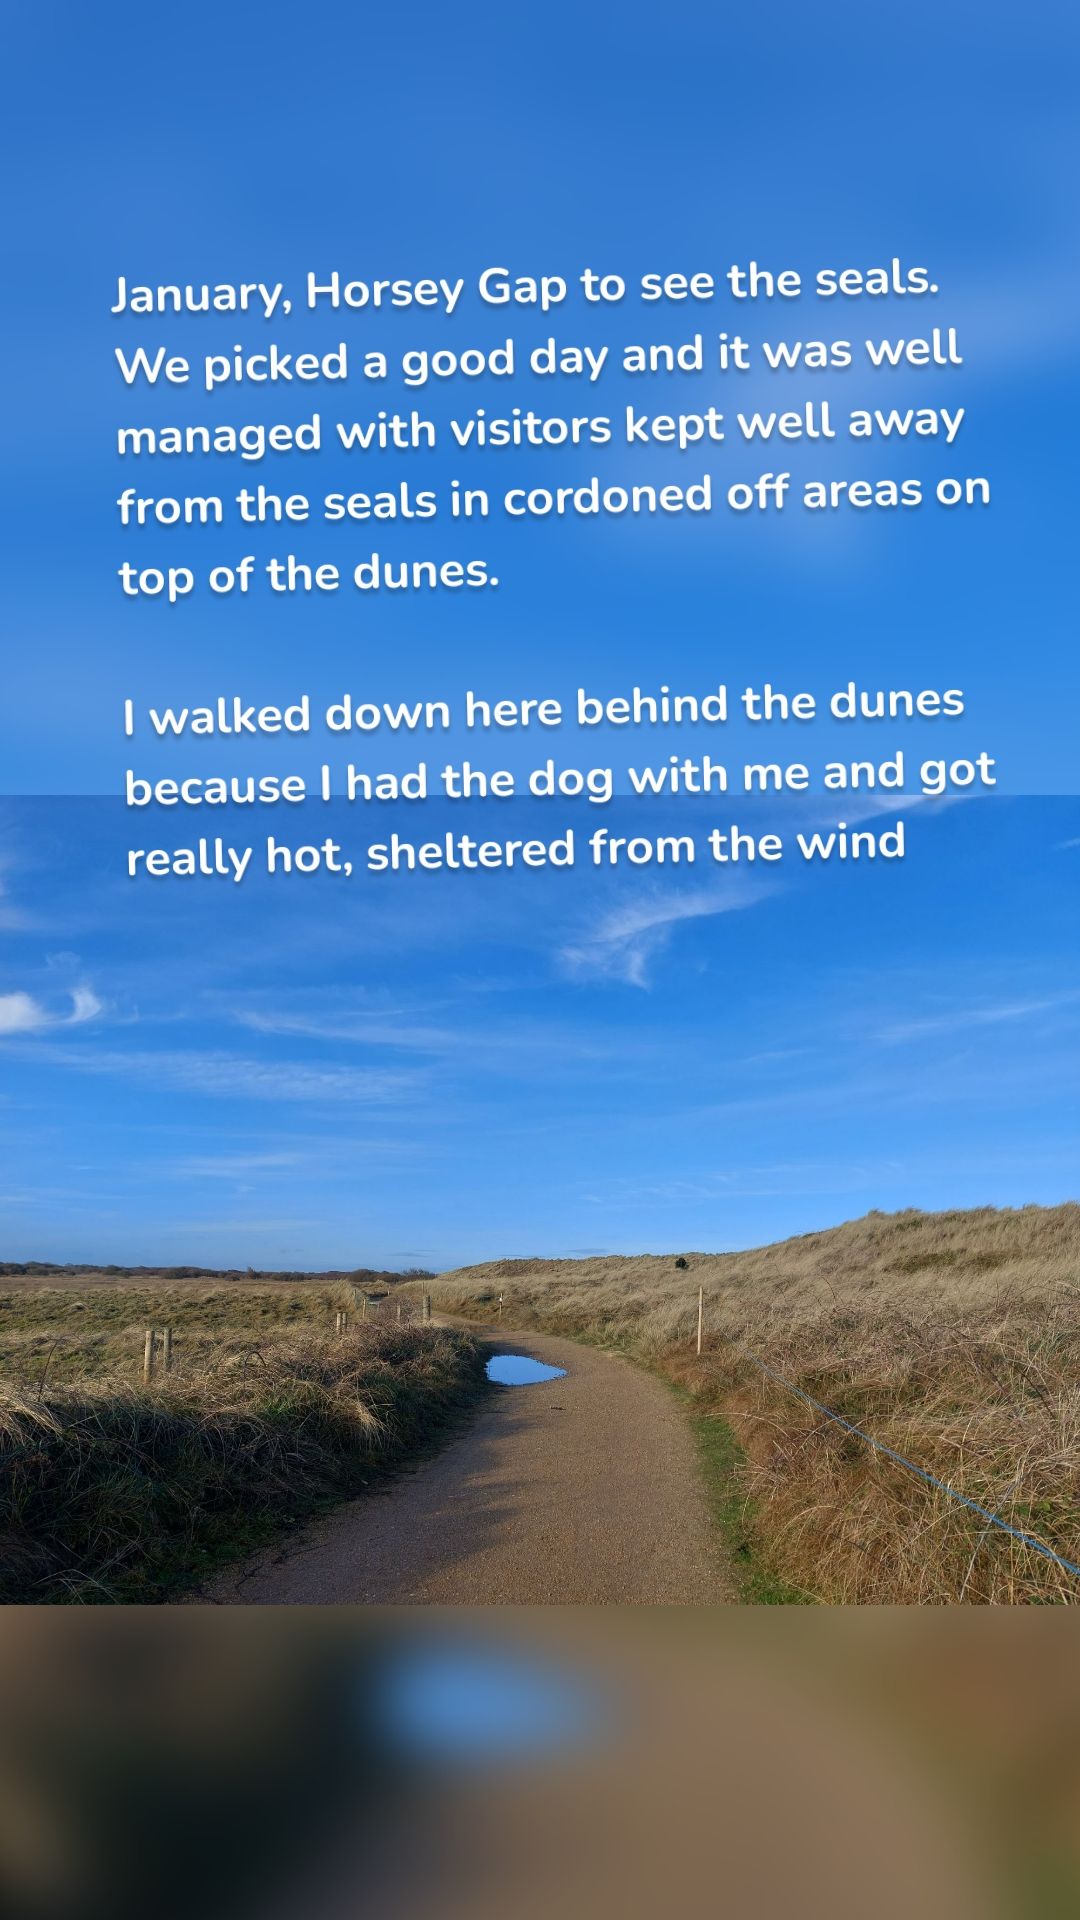 January, Horsey Gap to see the seals. We picked a good day and it was well managed with visitors kept well away from the seals in cordoned off areas on top of the dunes.

I walked down here behind the dunes because I had the dog with me and got really hot, sheltered from the wind